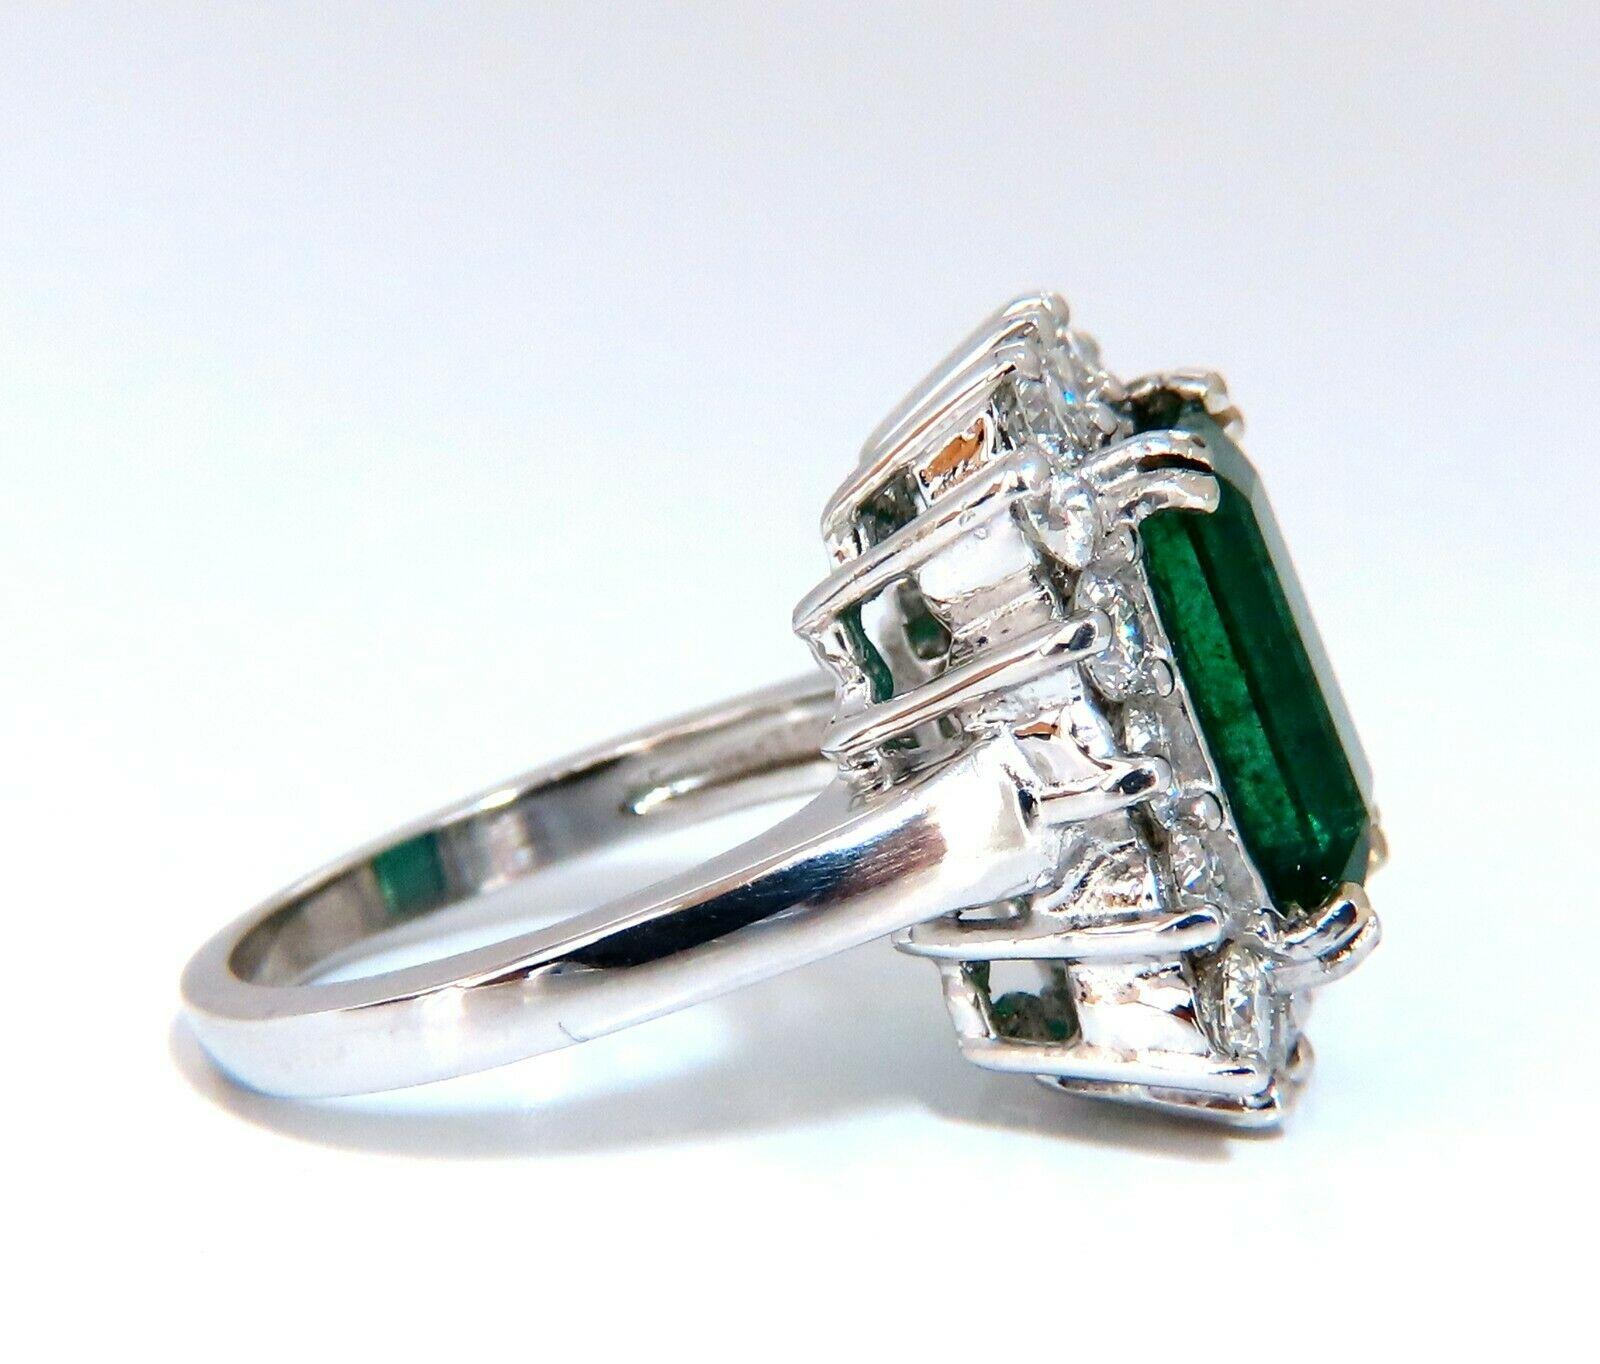 Prime Halo Mod Deco Green.

5.40ct. Natural Emerald Ring

Emerald, Brilliant cut

12 x 8.3mm Diameter

Transparent & Vivid Green 

1.75ct. Diamonds.

Round & full cuts 

G-color Vs-2 clarity.  

14kt. white gold

9.9 grams

Ring Current size: